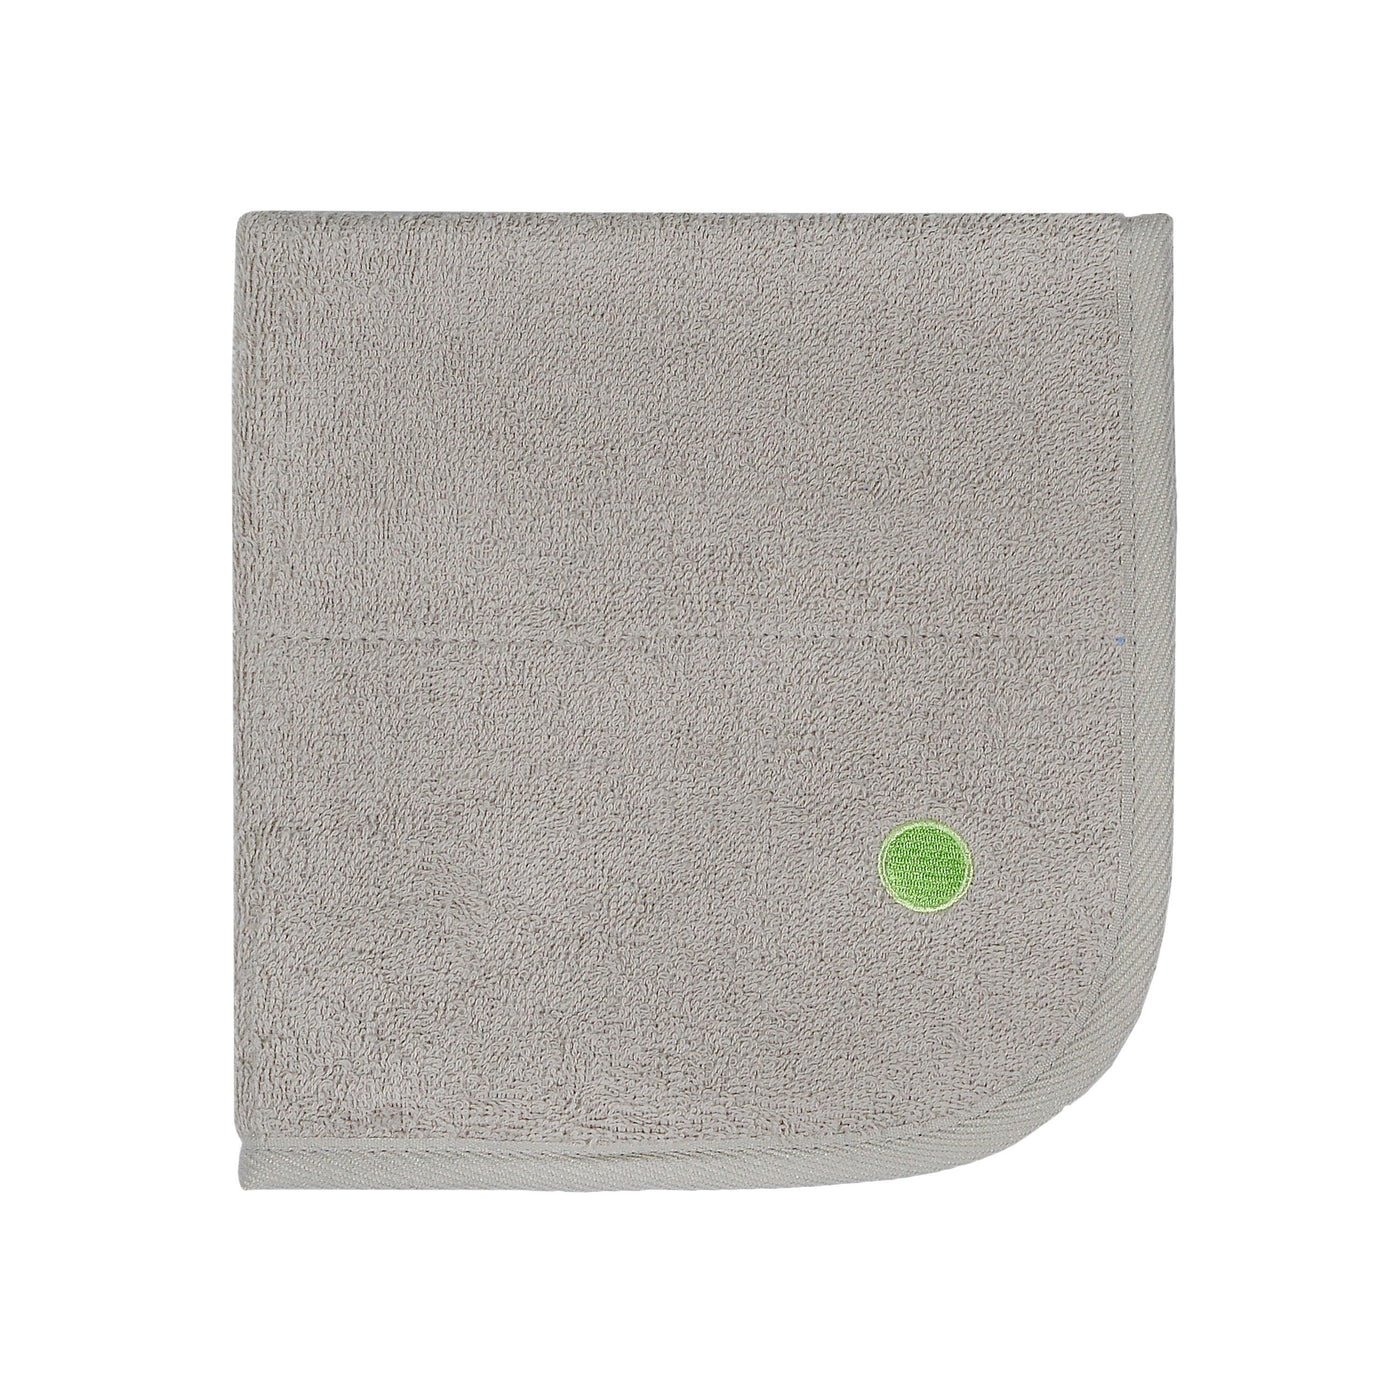 PeaPod Mats Incontinence  Washable and Waterproof Bed and Chair